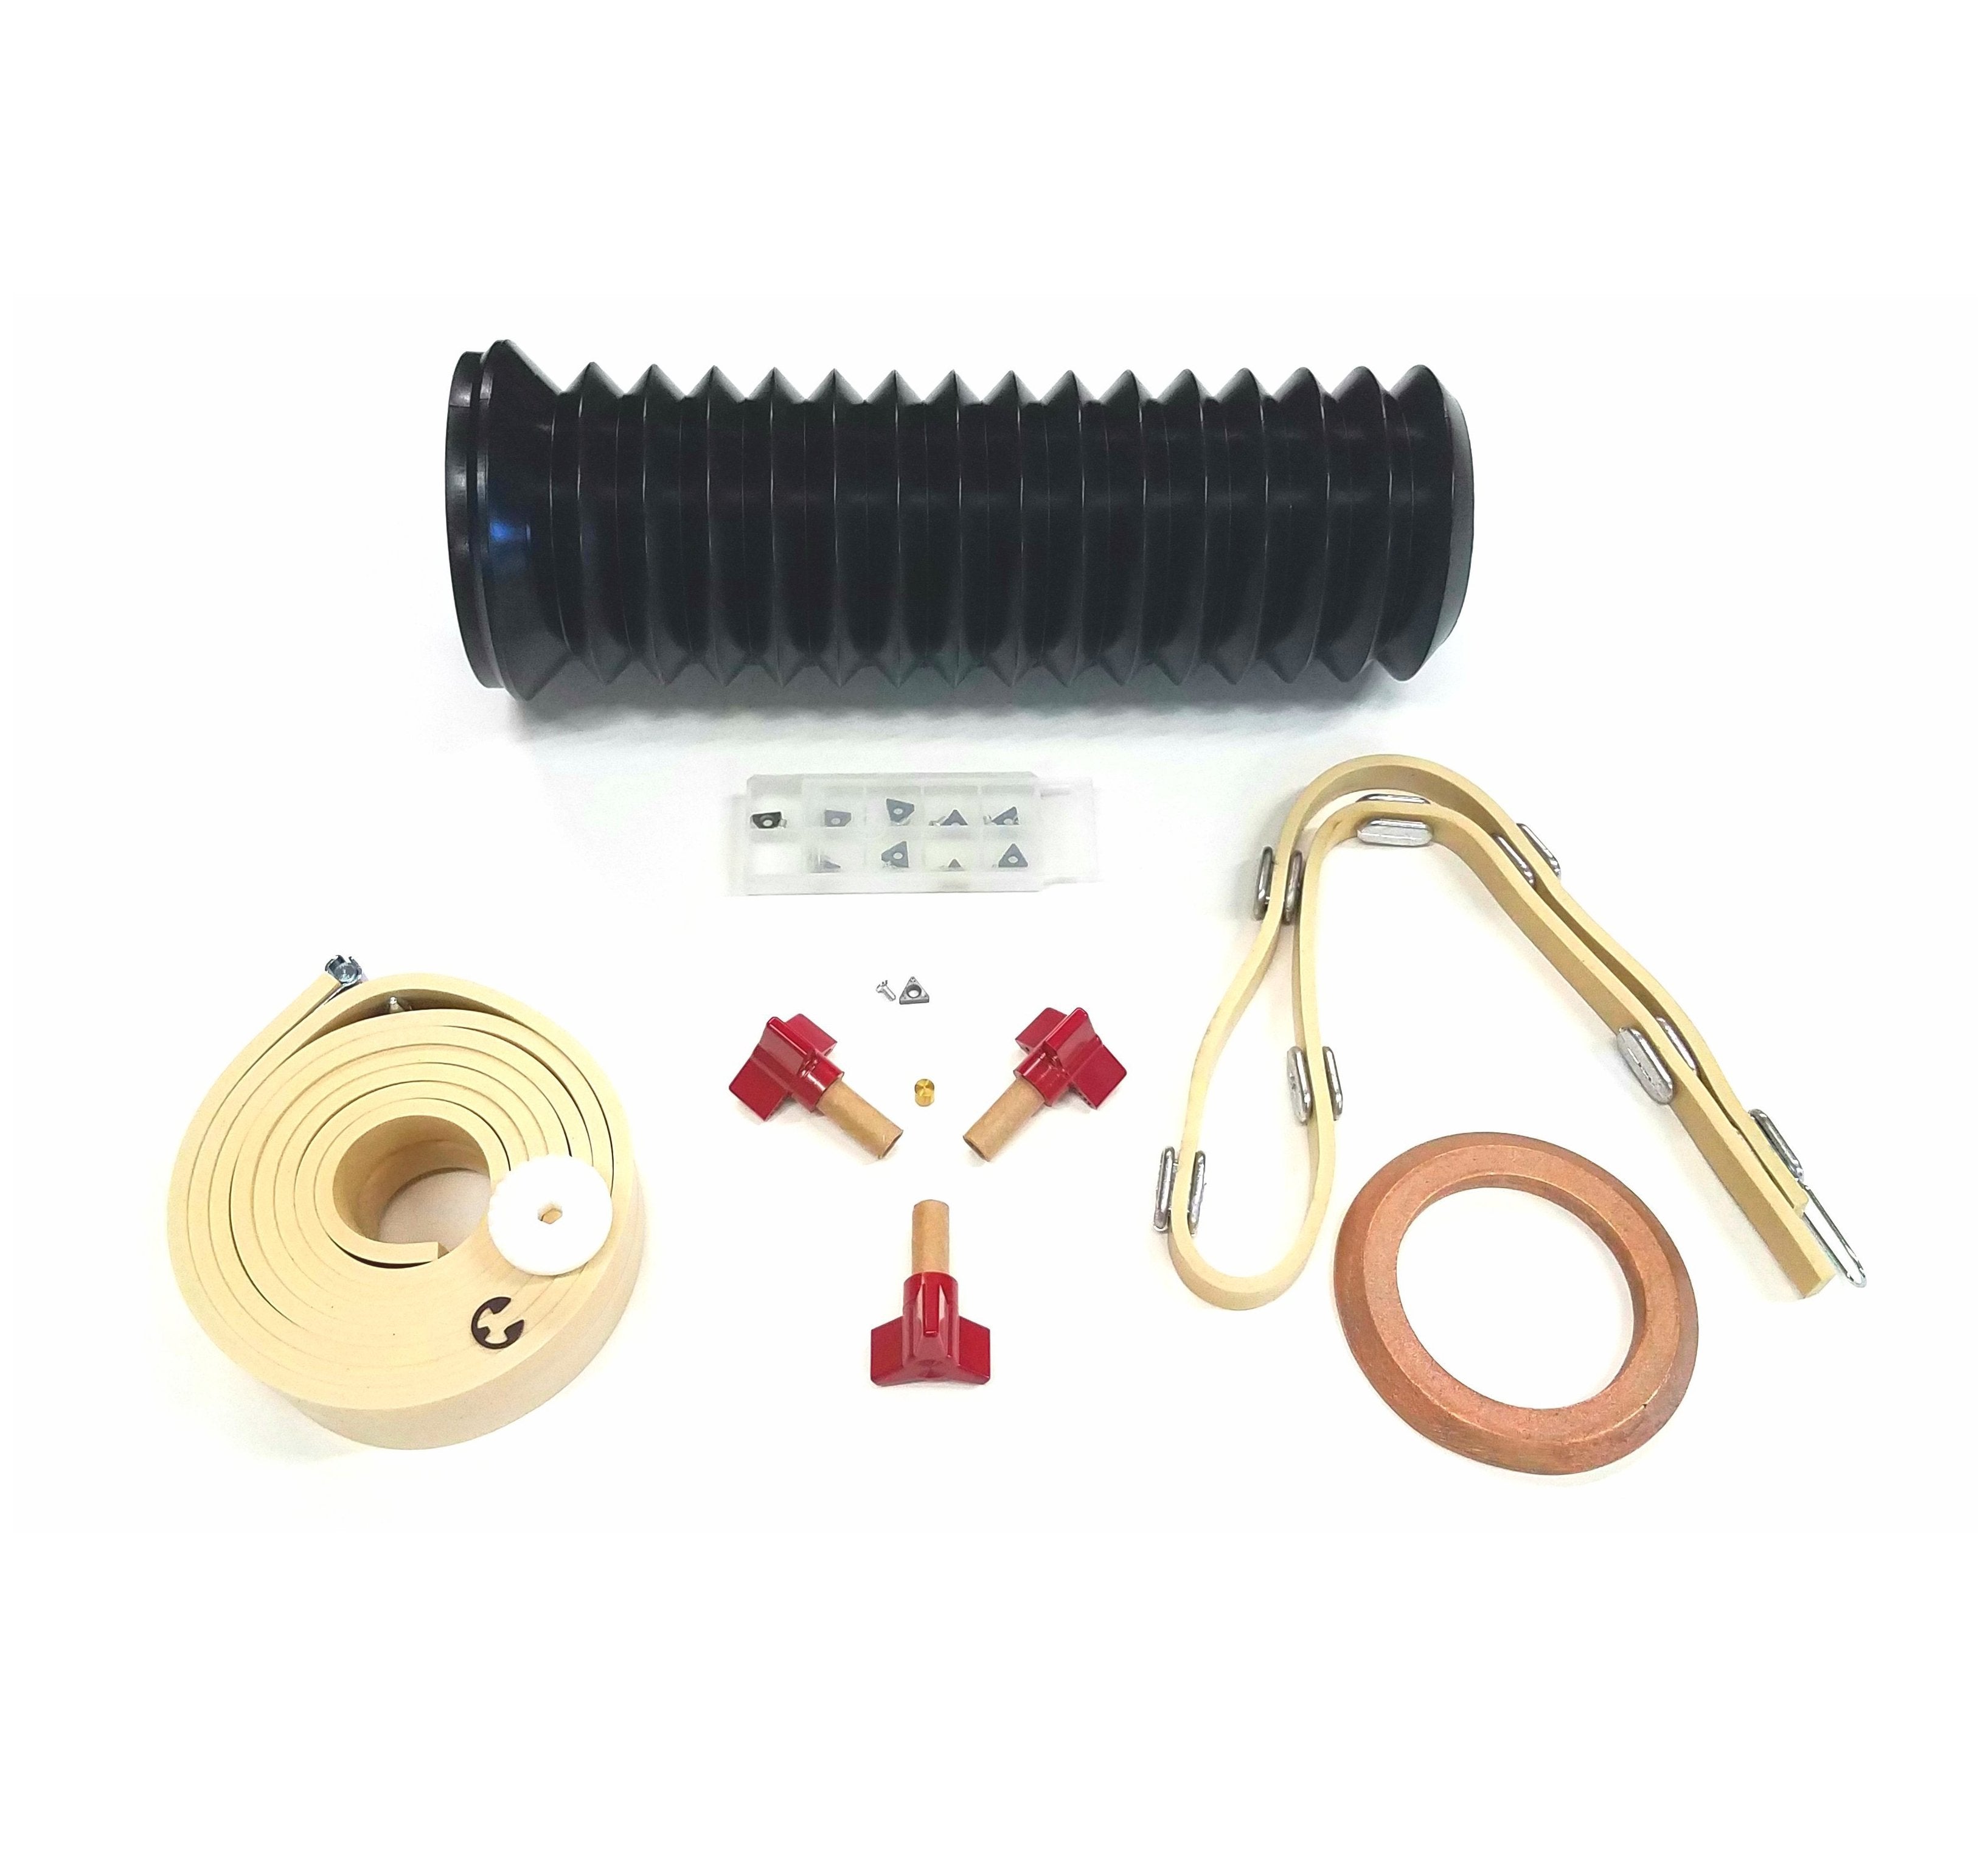 brake lathe repair kits containing boots, belts, silencer bands, bits, and much more. 